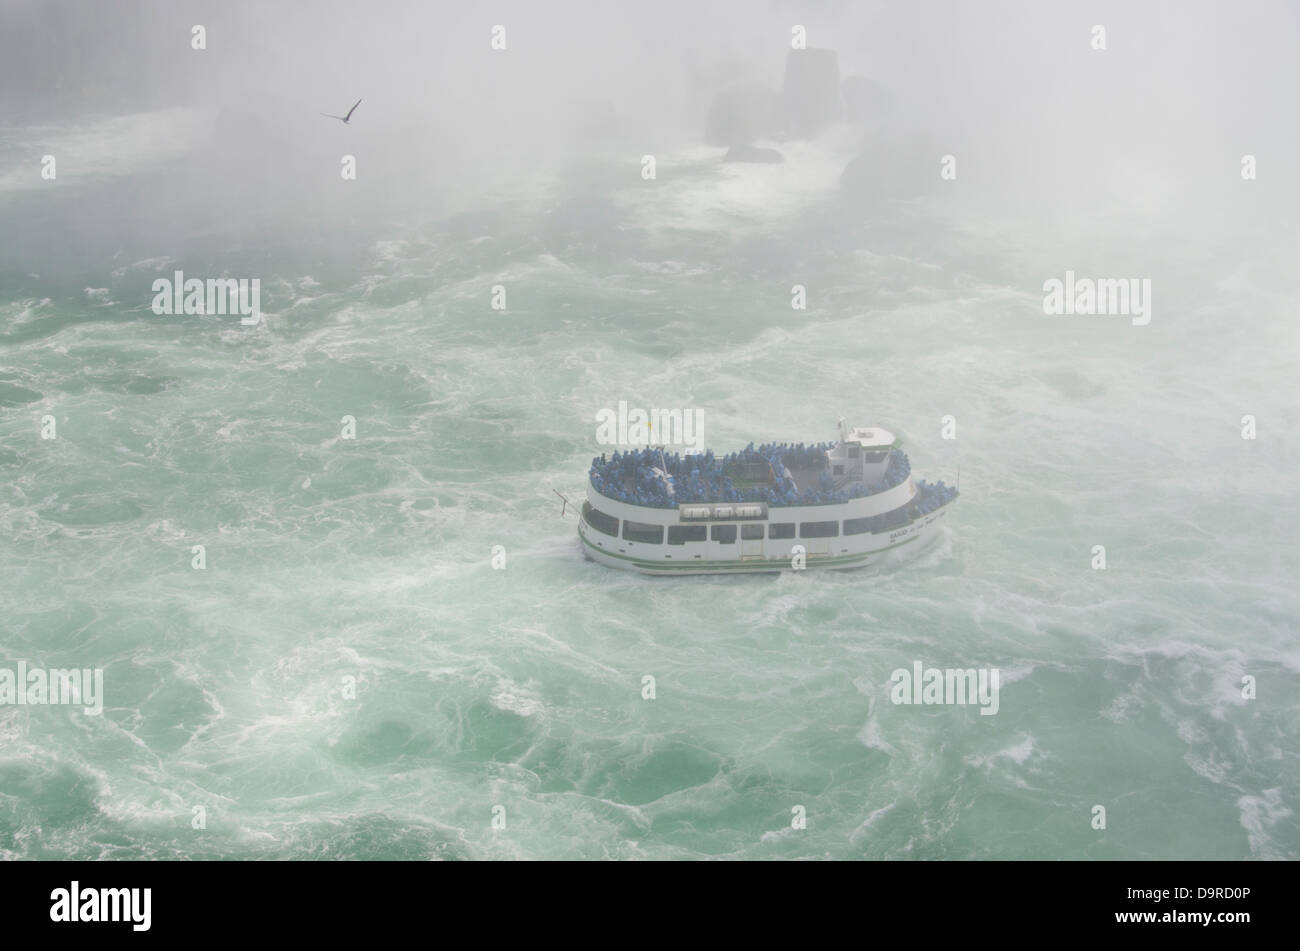 USA / Canada, New York / Ontario, Niagara Falls. Maid of the Mist tourist boat in the waterfall mist from Horseshoe Falls. Stock Photo